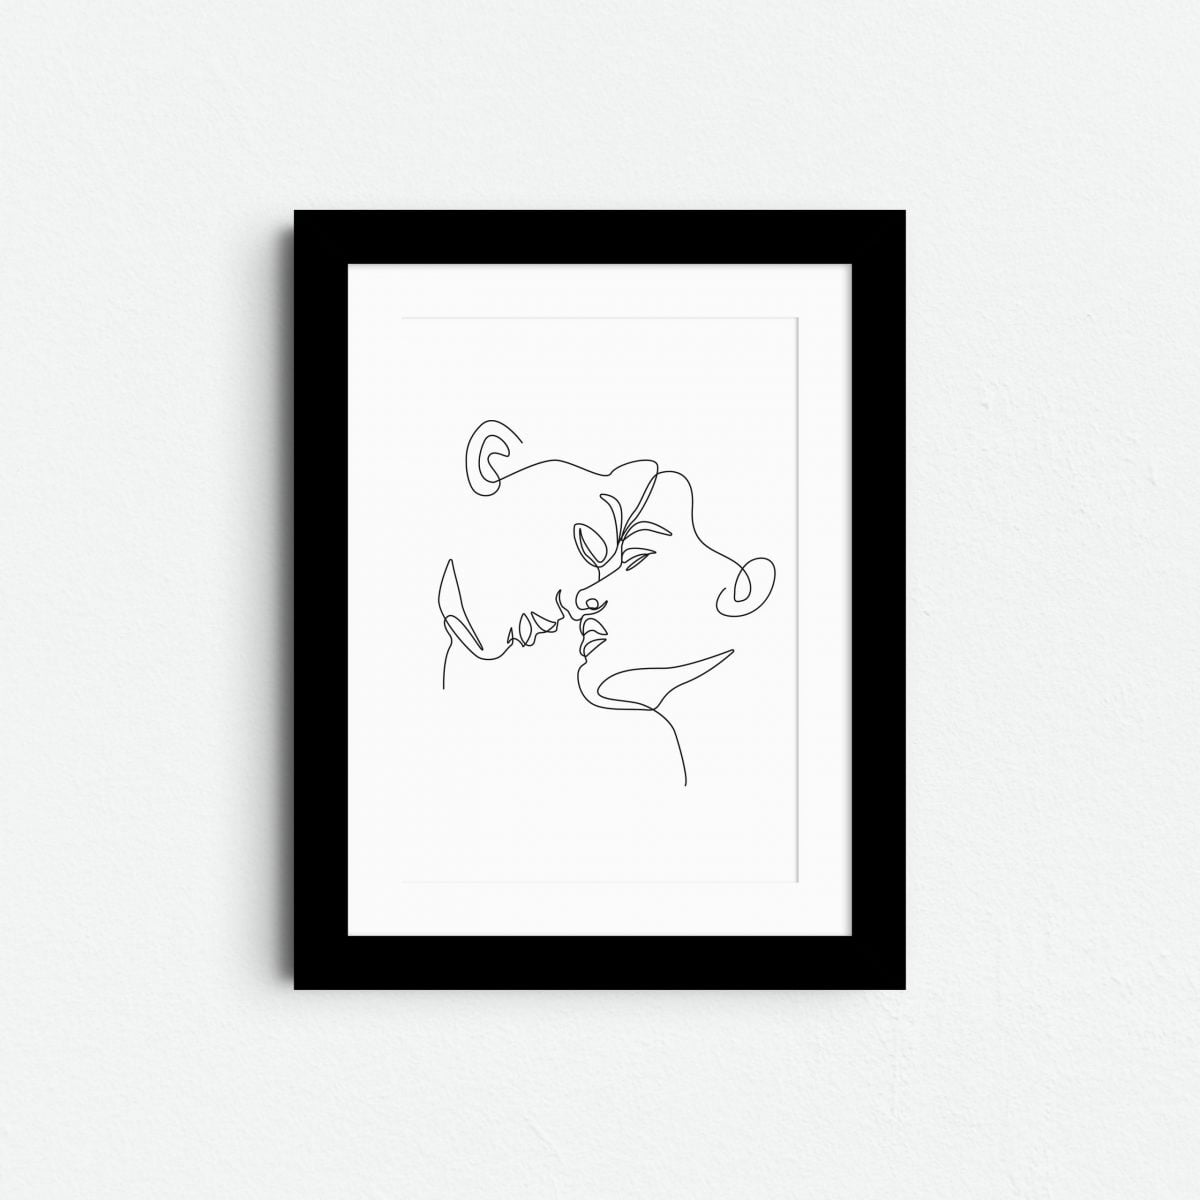 his-embrace-nude-erotic-wall-art-prints-framed-portrait